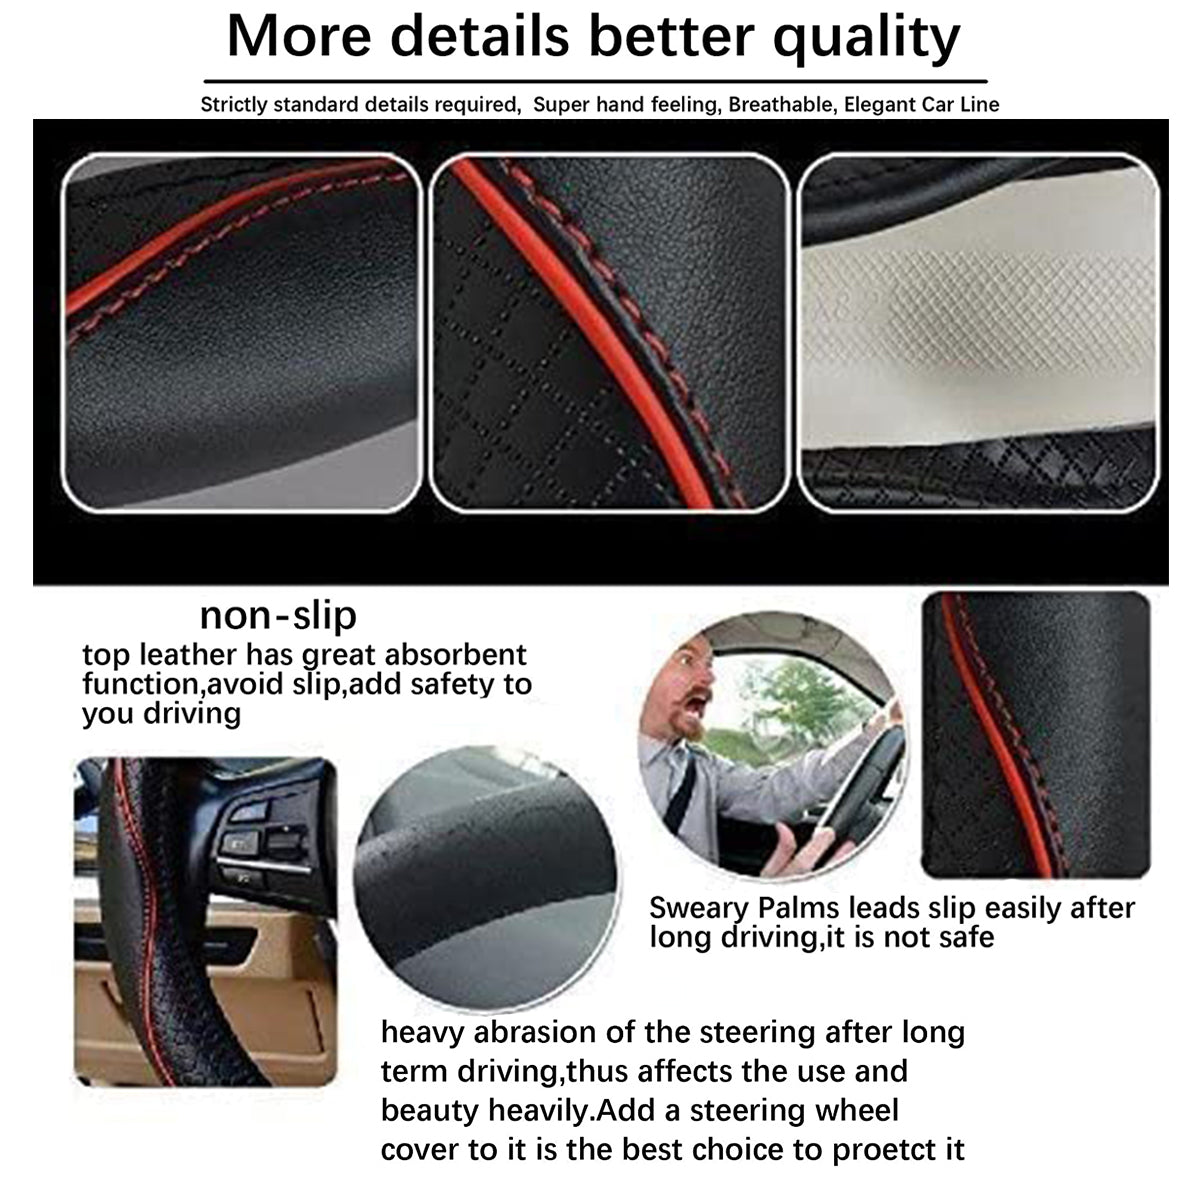 Car Steering Wheel Cover, Custom For Your Cars, Anti-Slip, Safety, Soft, Breathable, Heavy Duty, Thick, Full Surround, Sports Style, Car Accessories KX18990